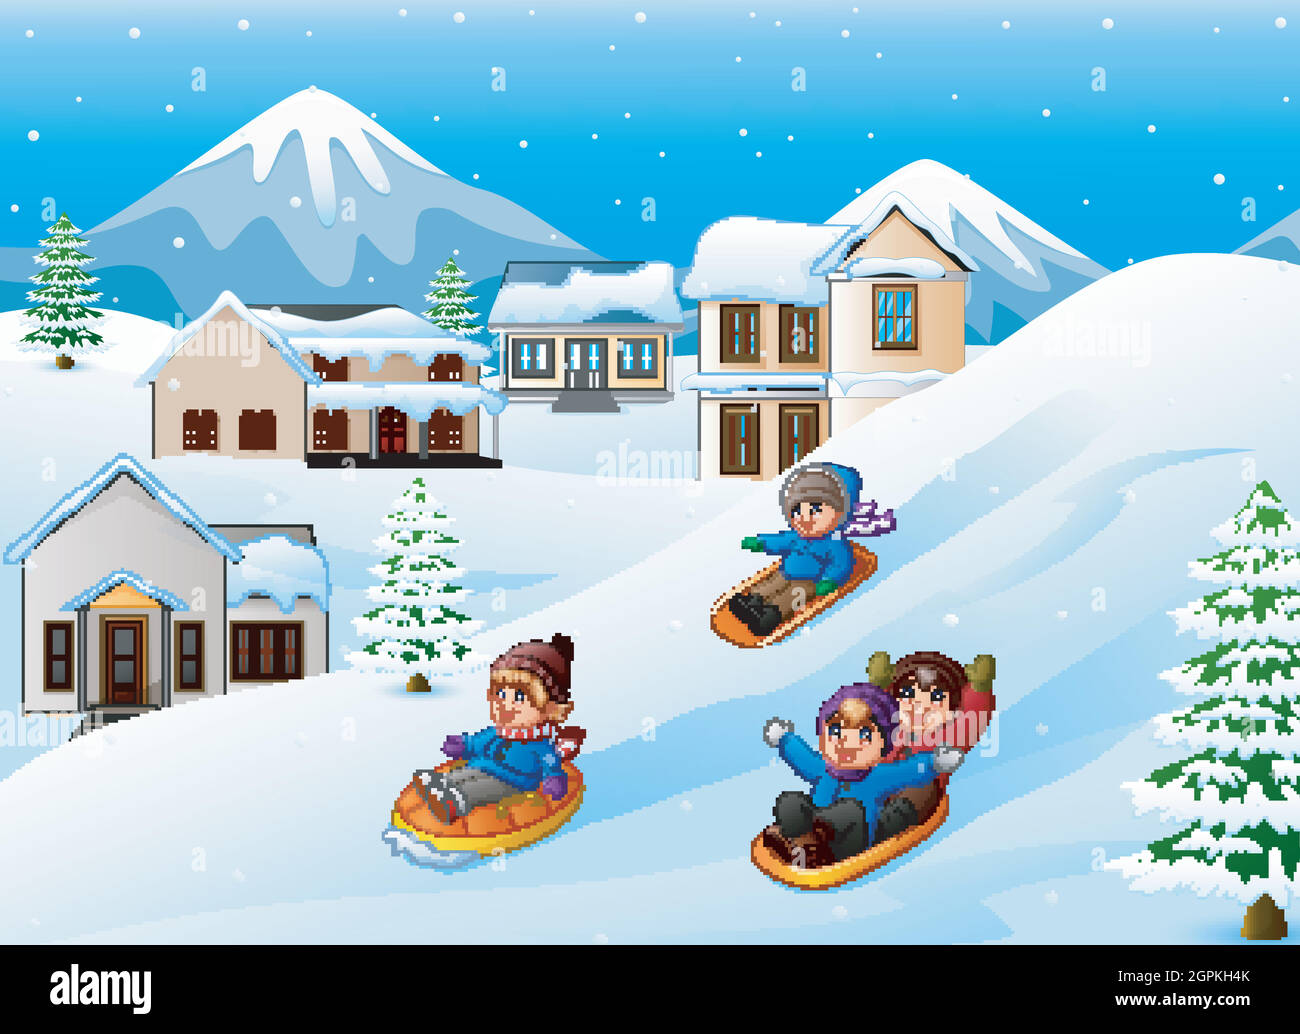 Children playing sledding in the snow Stock Vector